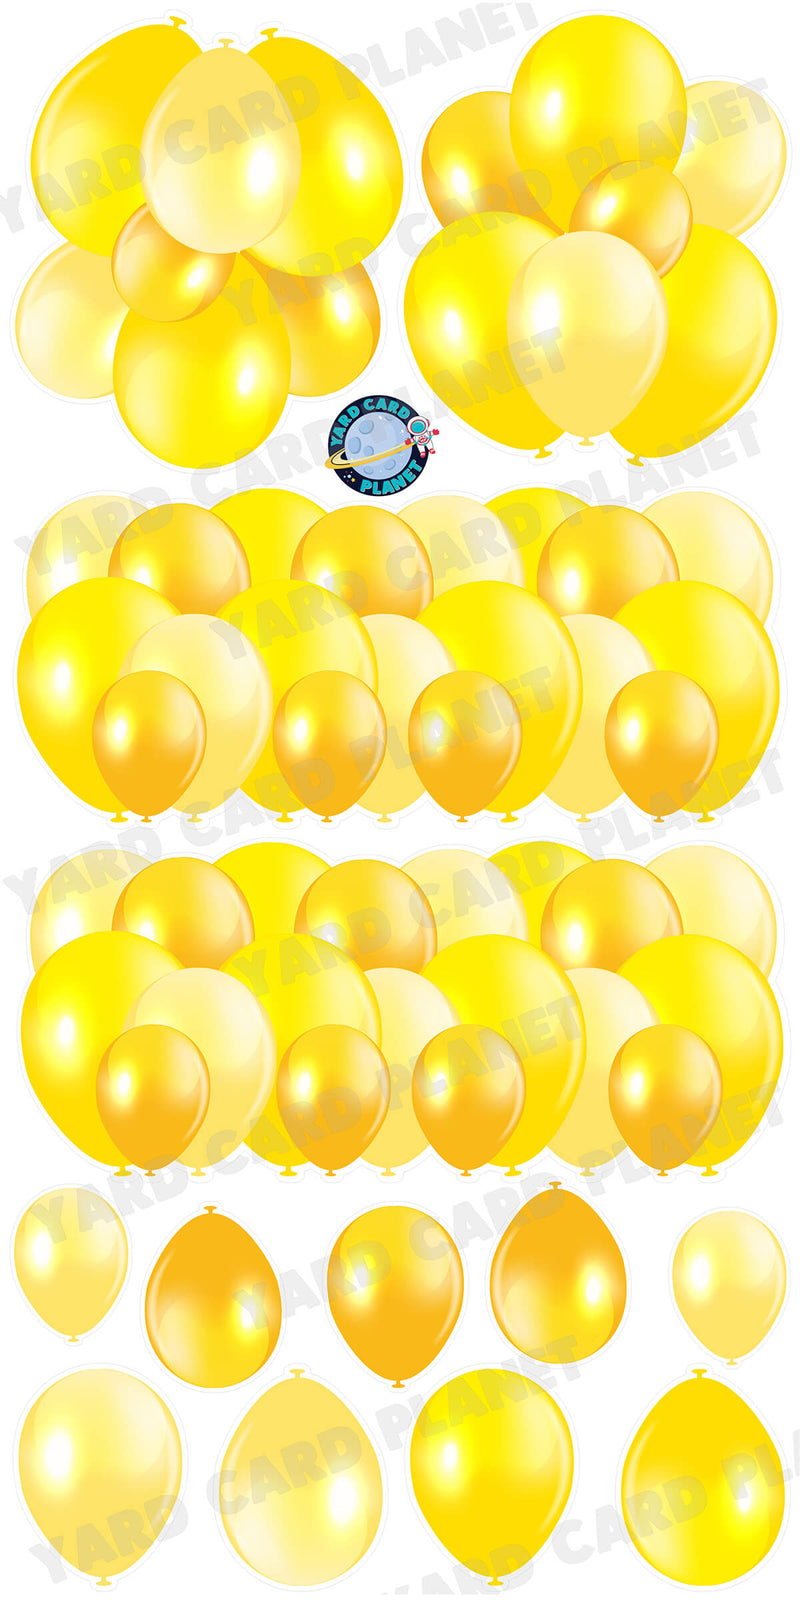 Yellow Balloon Panels, Bouquets and Singles Yard Card Set